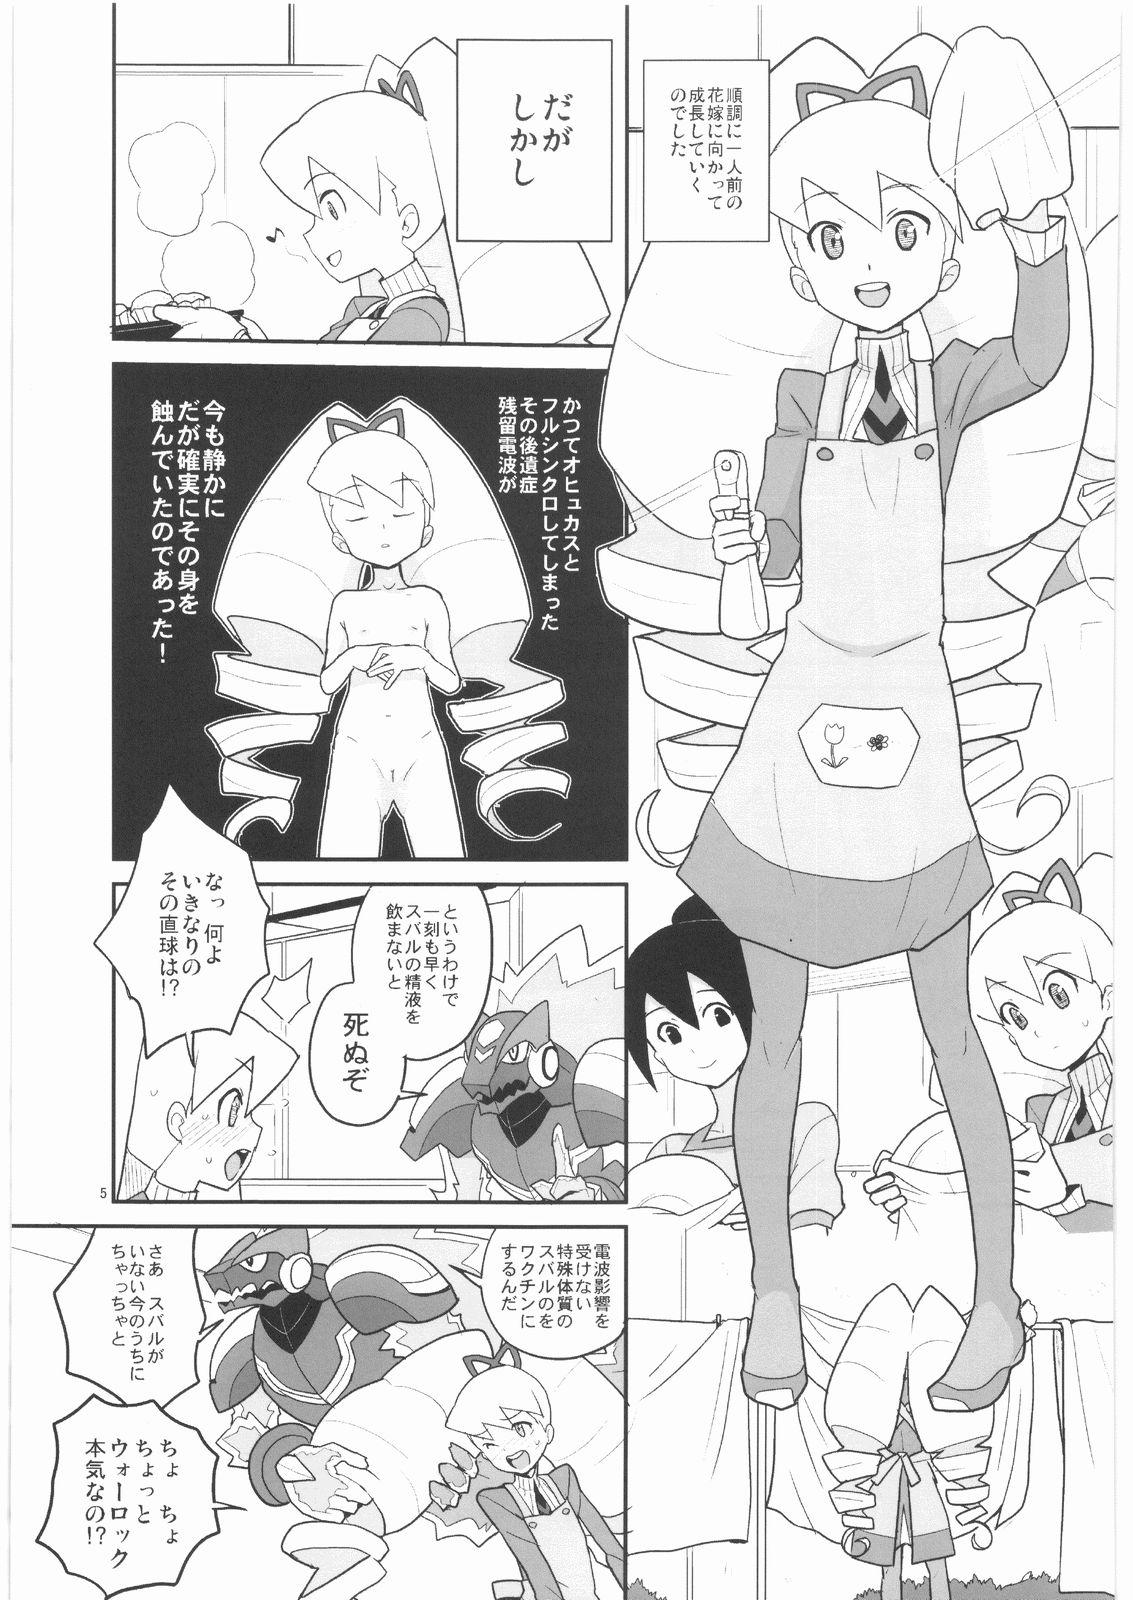 Hot Brunette Drill to Tights to Iinchou! - Megaman Mega man star force Cocksuckers - Page 4